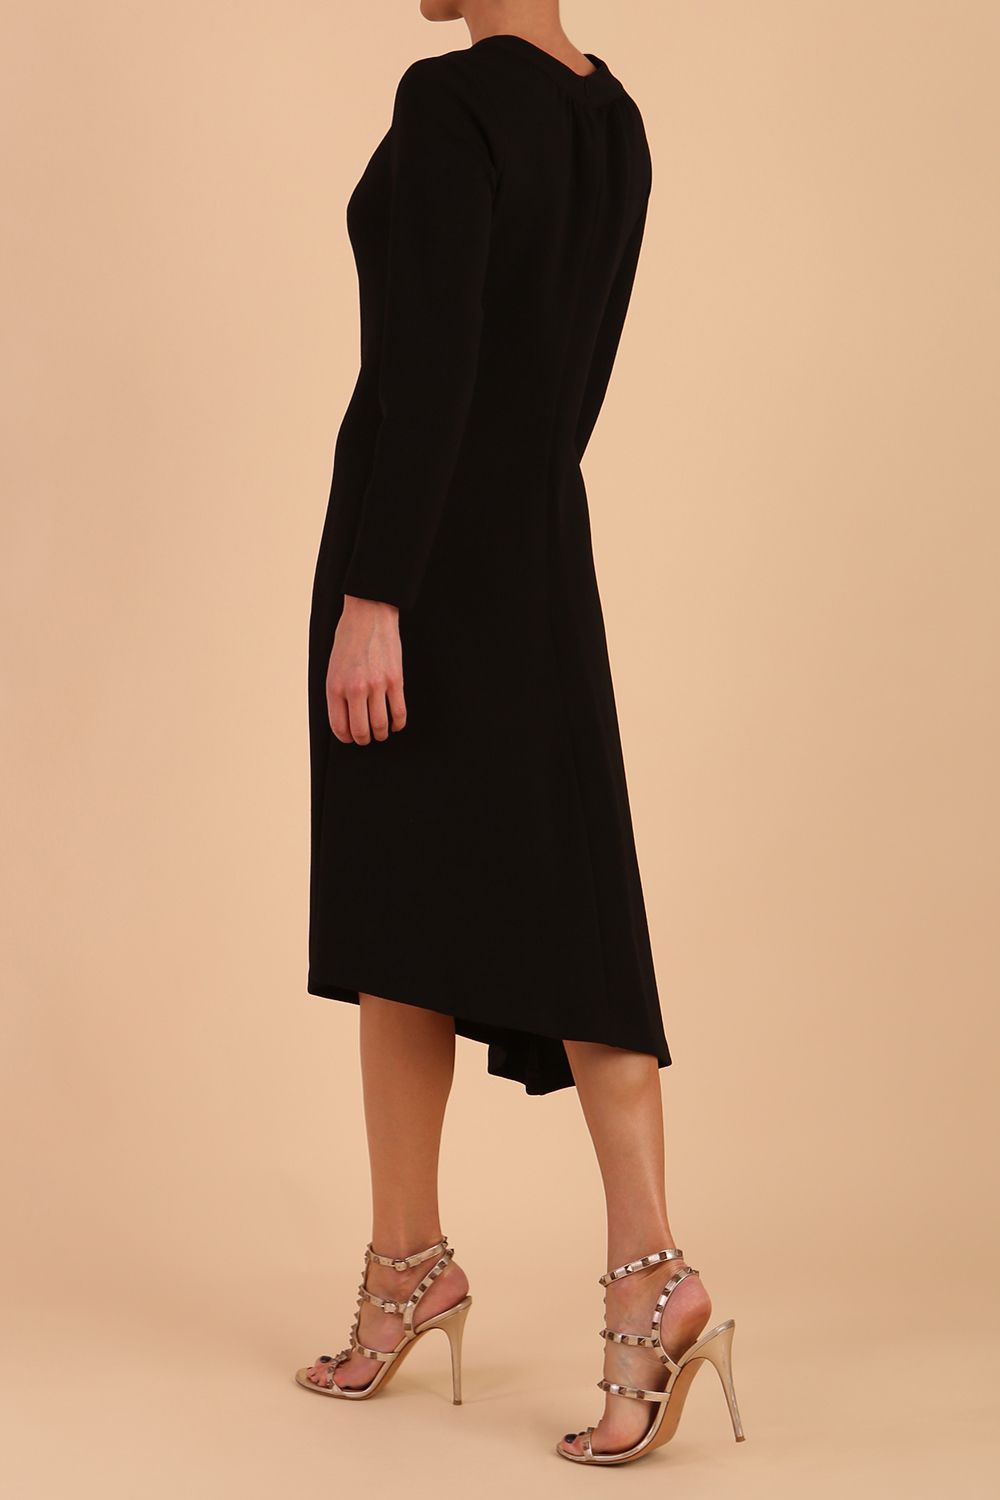 model is wearing diva catwalk dartington asymmetric skirt midaxi long sleeve dress with rounded pleated neckline a-line style in black side back